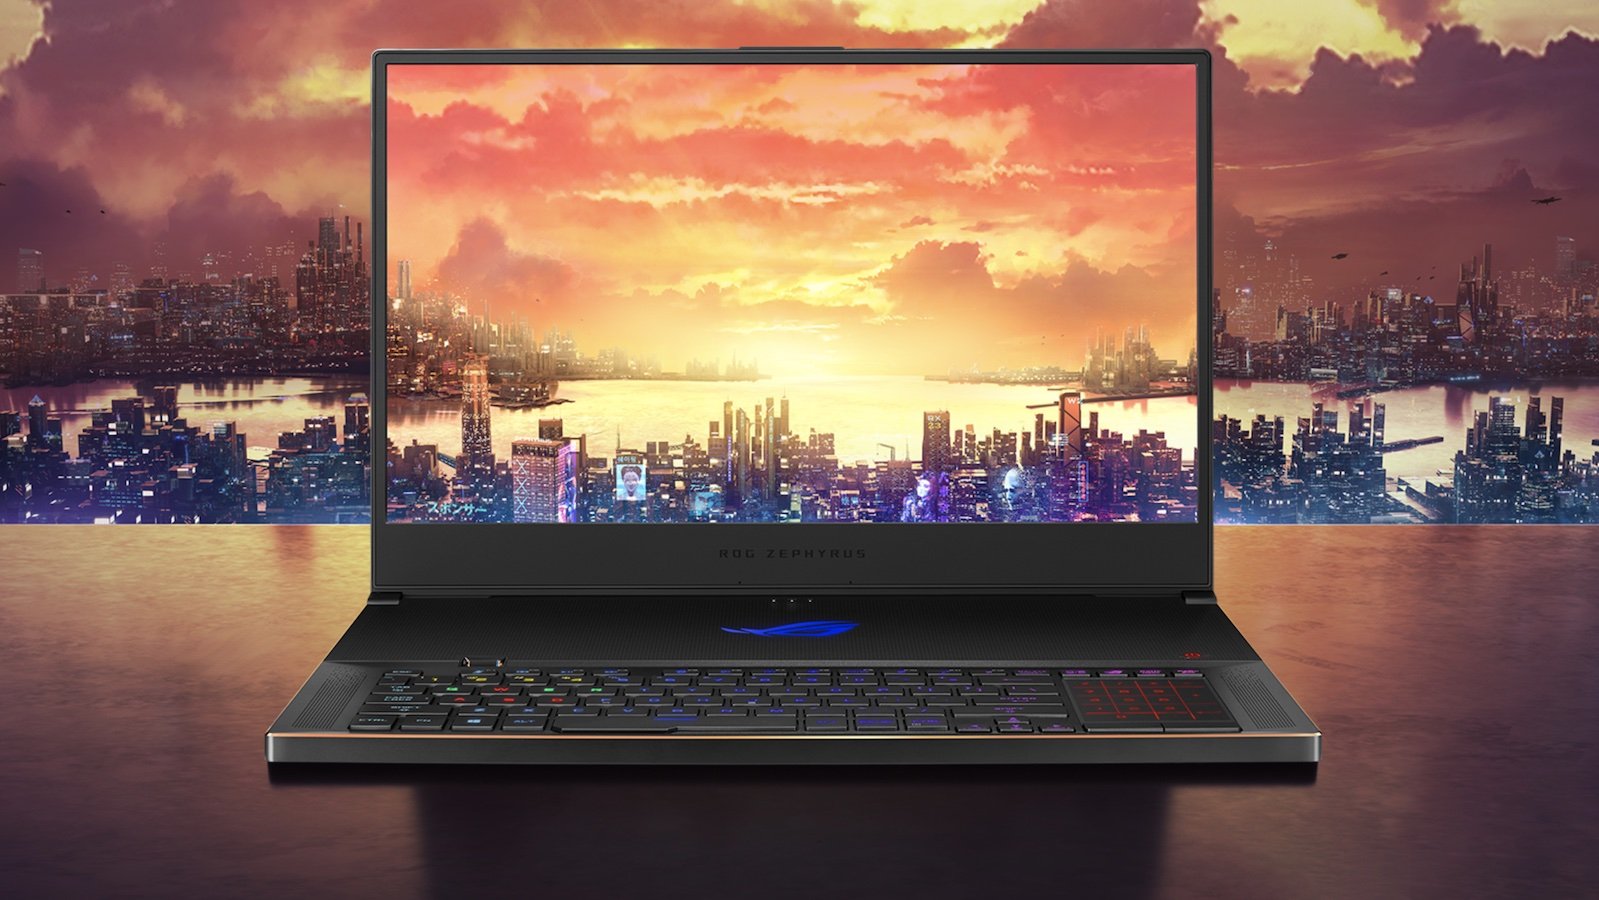 ASUS ROG Zephyrus S17 slim gaming laptop fits a 17-inch display into a 15-inch form factor